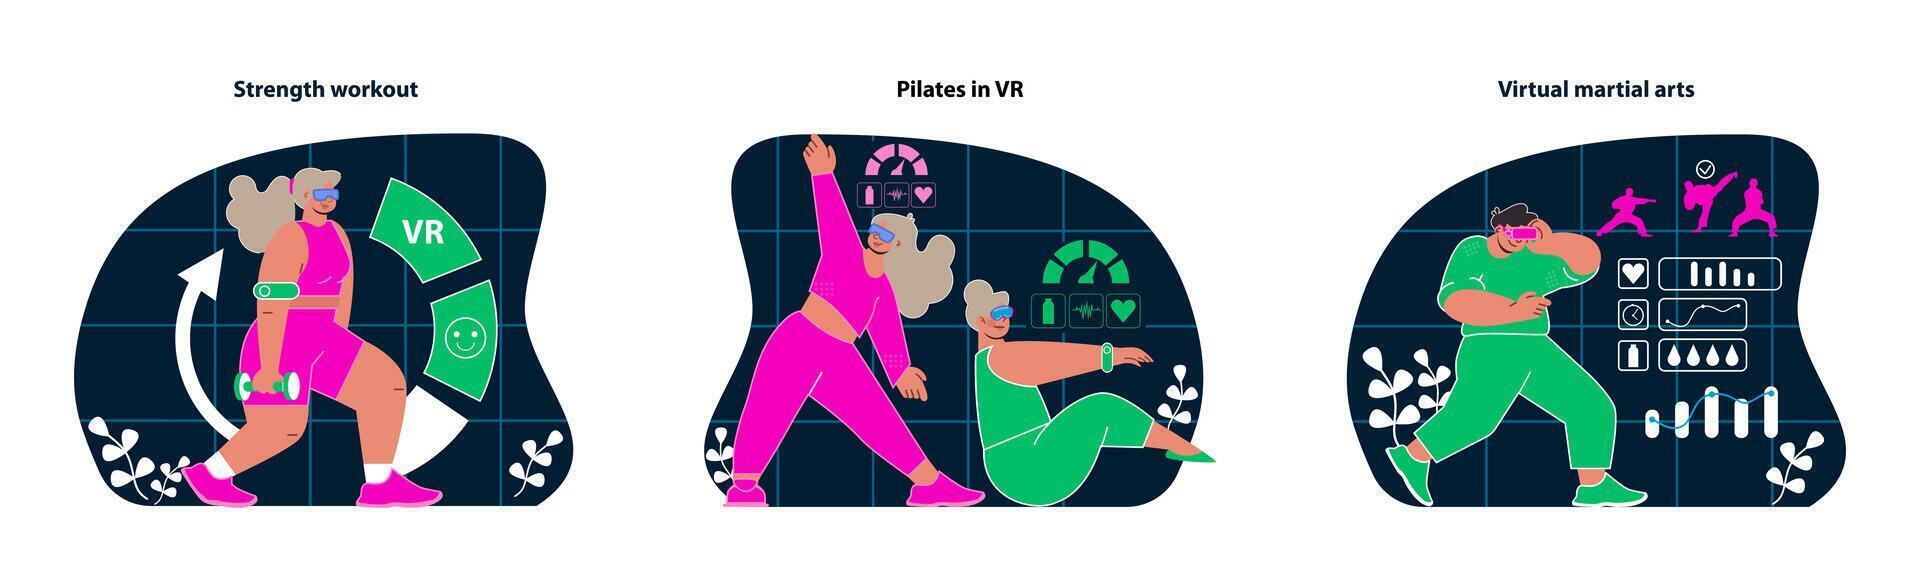 VR Workout trio. Strength training, Pilates, and martial arts in a virtual world. vector